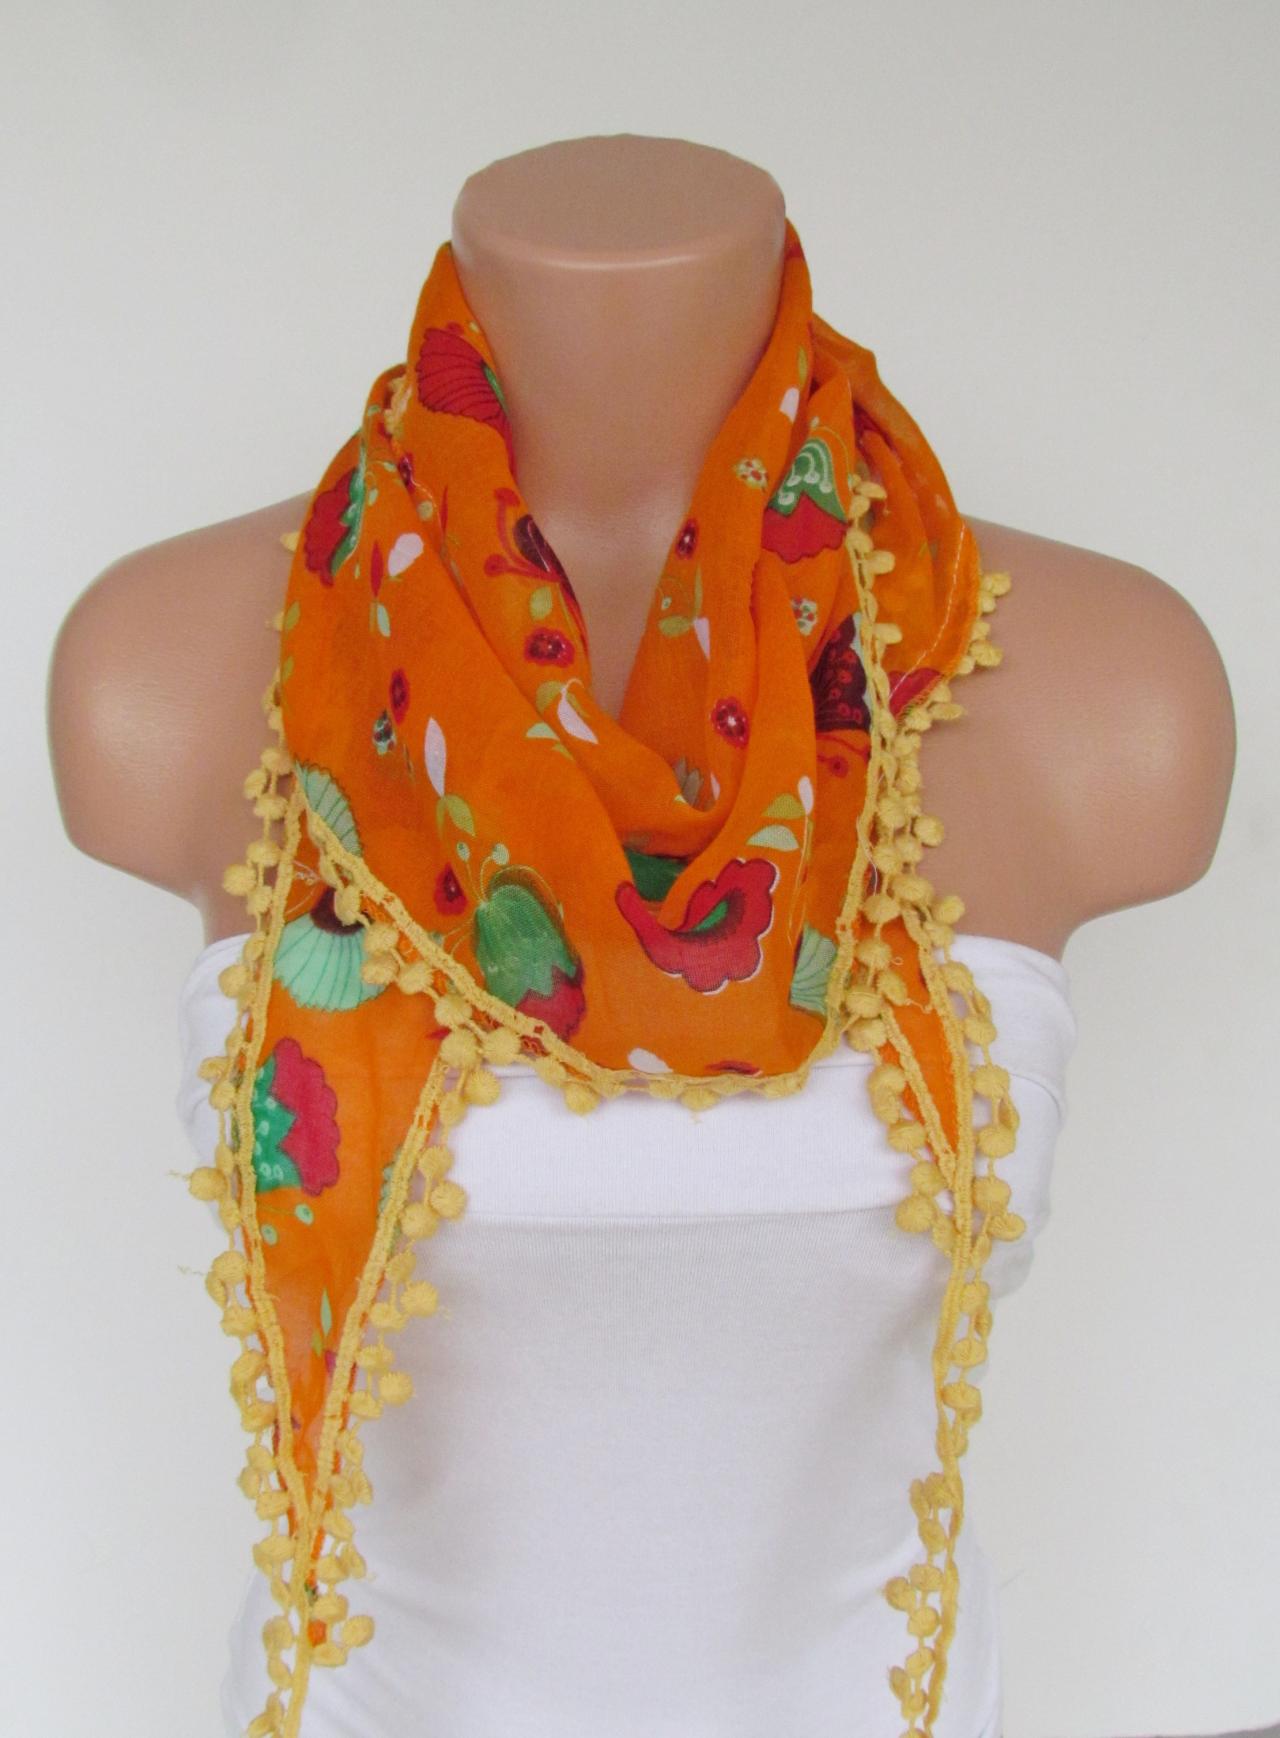 Long Scarf With Fringe-New Season Scarf-Headband-Necklace- Infinity Scarf- Spring Accessory-Floral Orange Scarf-New Season-Gift